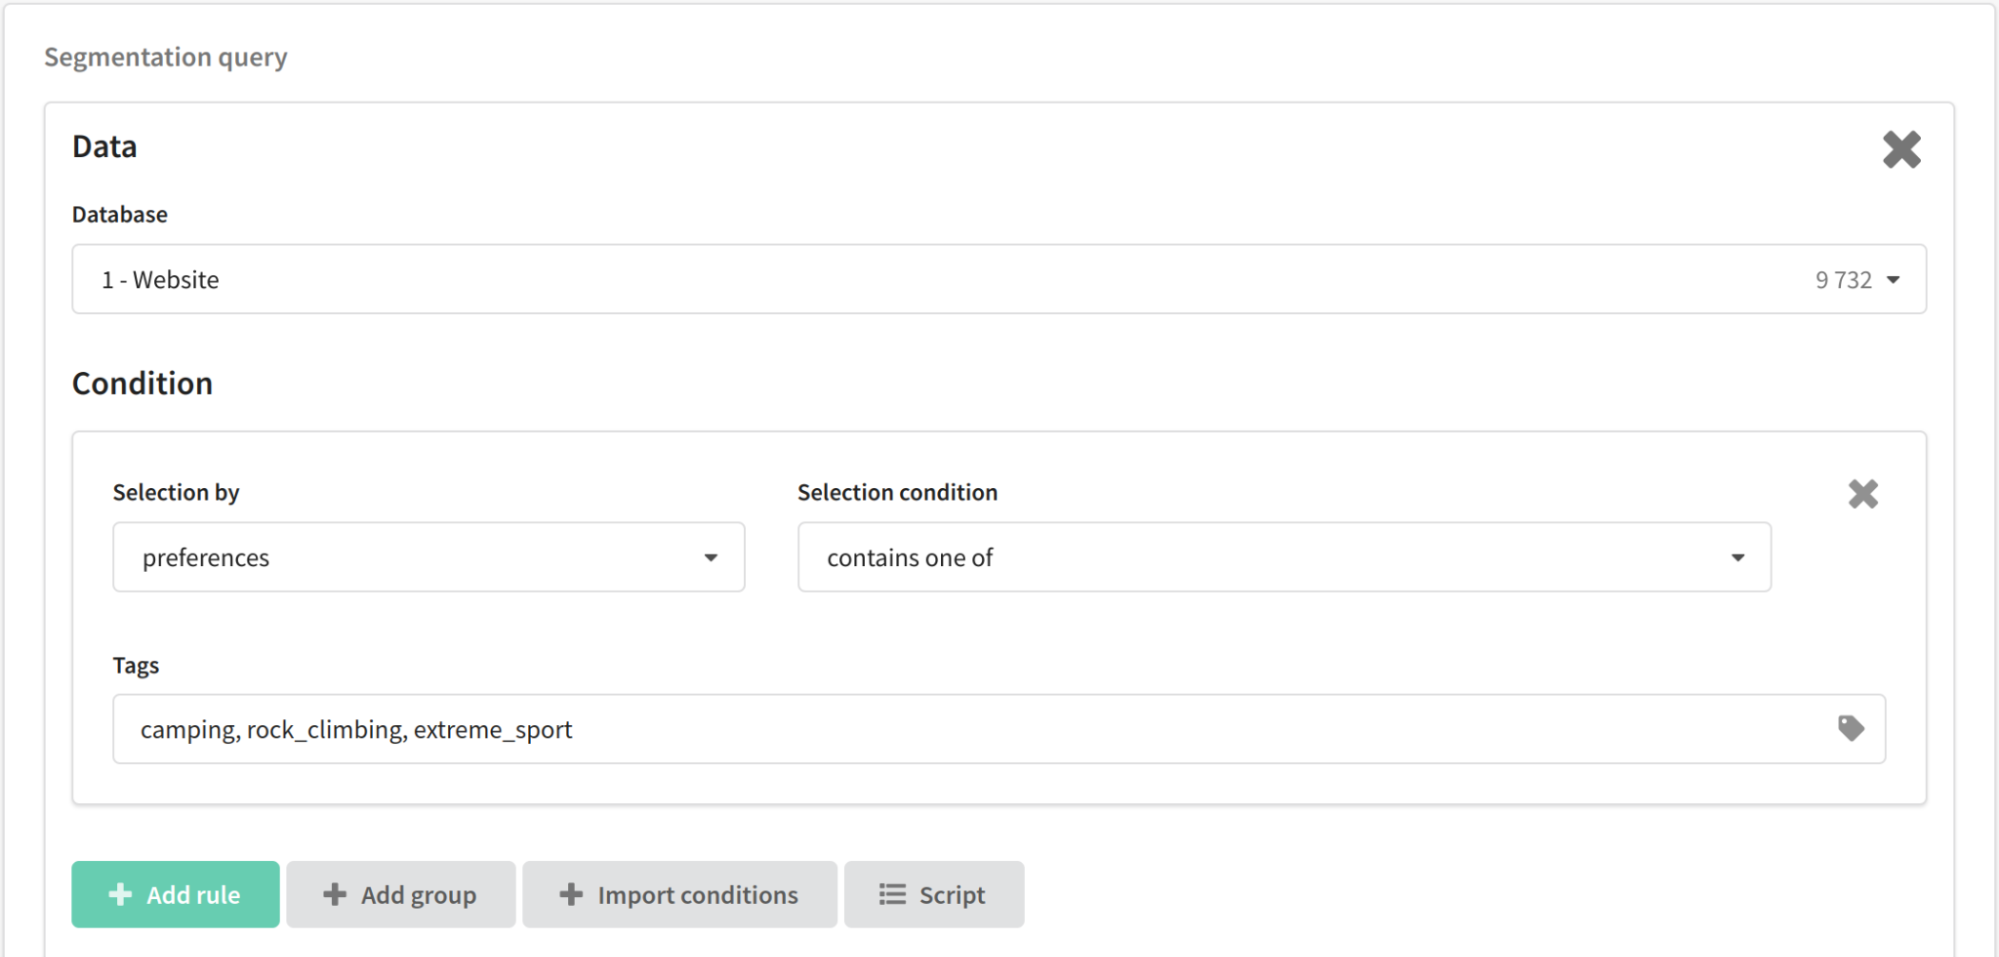 Selection by custom field when building a database segment